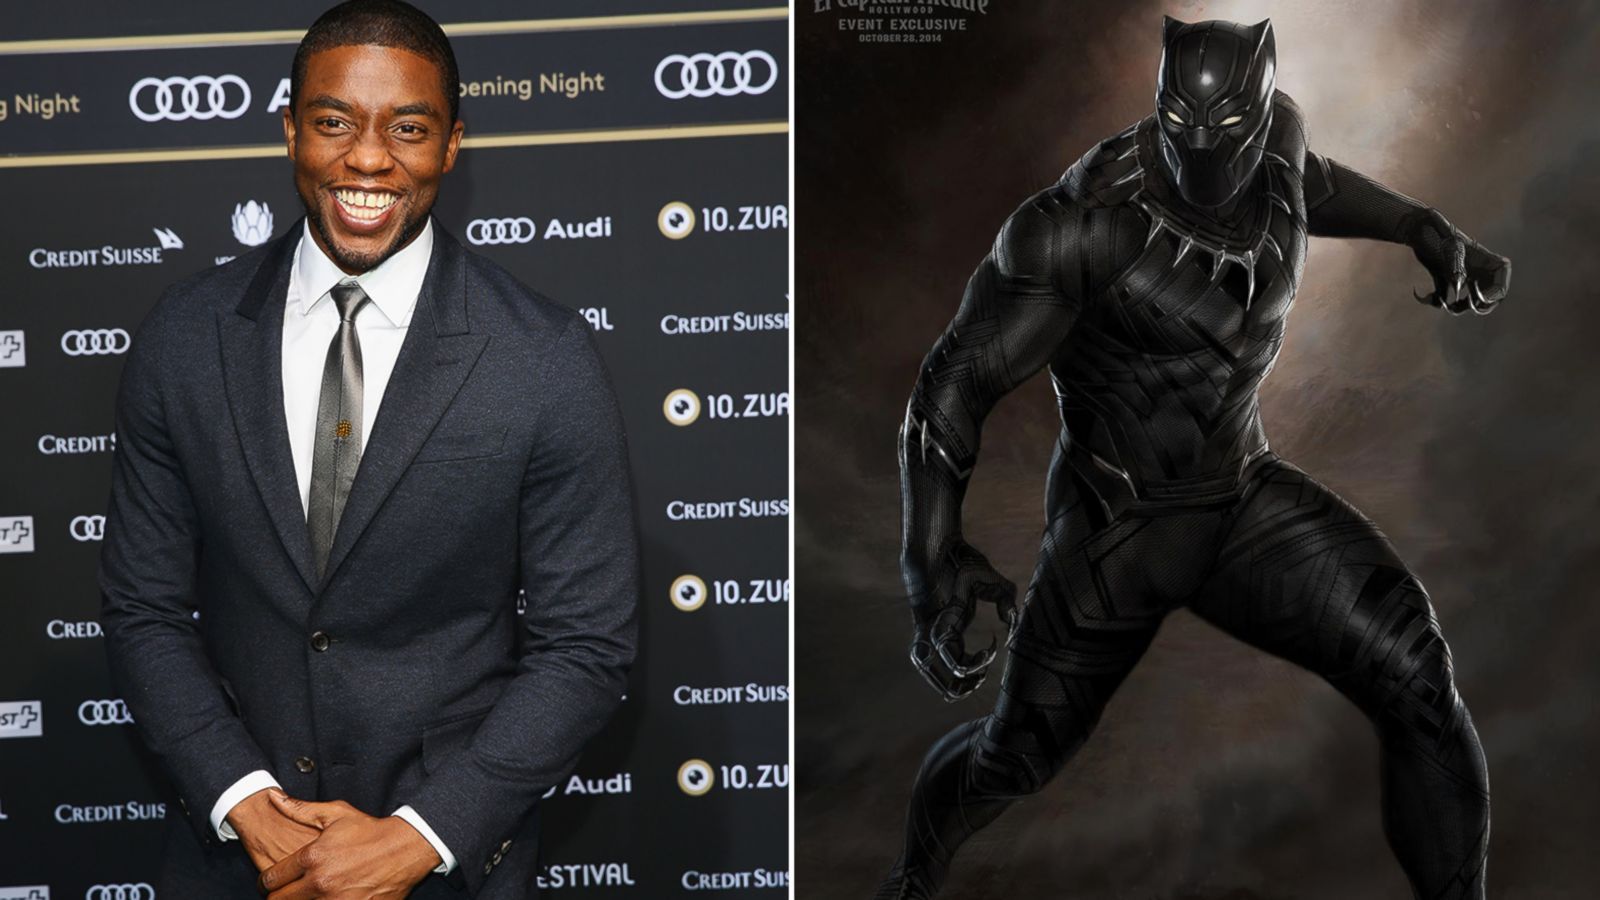 Things to Know About Chadwick Boseman, Marvel's 'Black Panther'